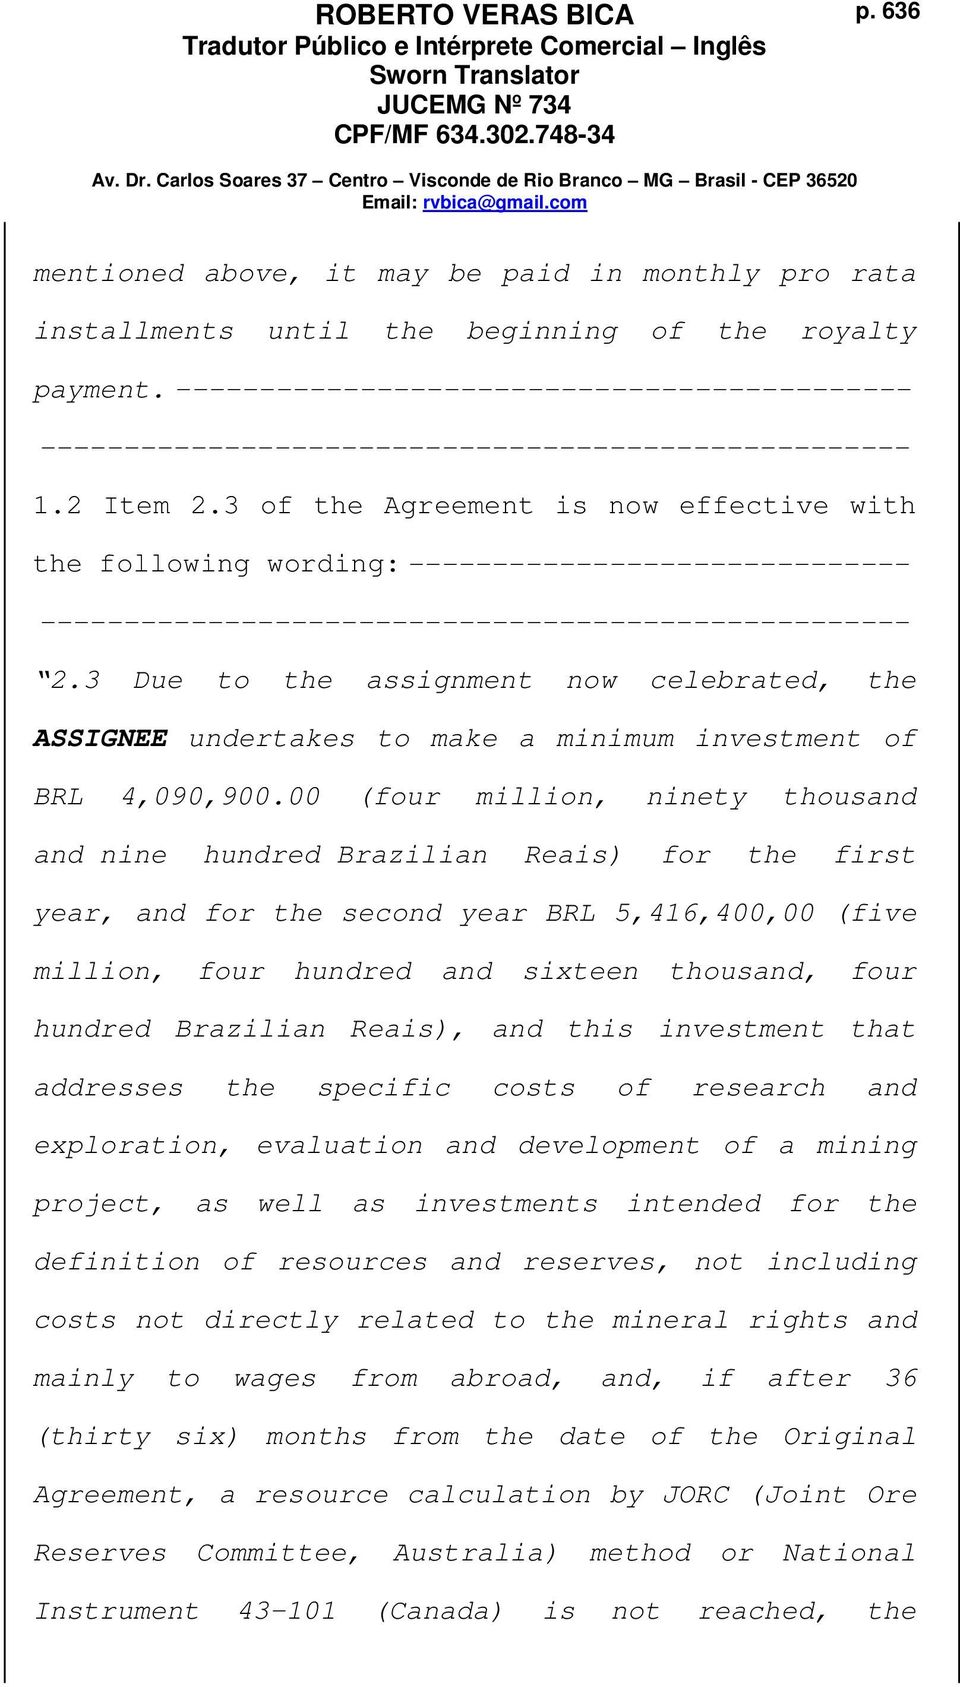 3 Due to the assignment now celebrated, the ASSIGNEE undertakes to make a minimum investment of BRL 4,090,900.